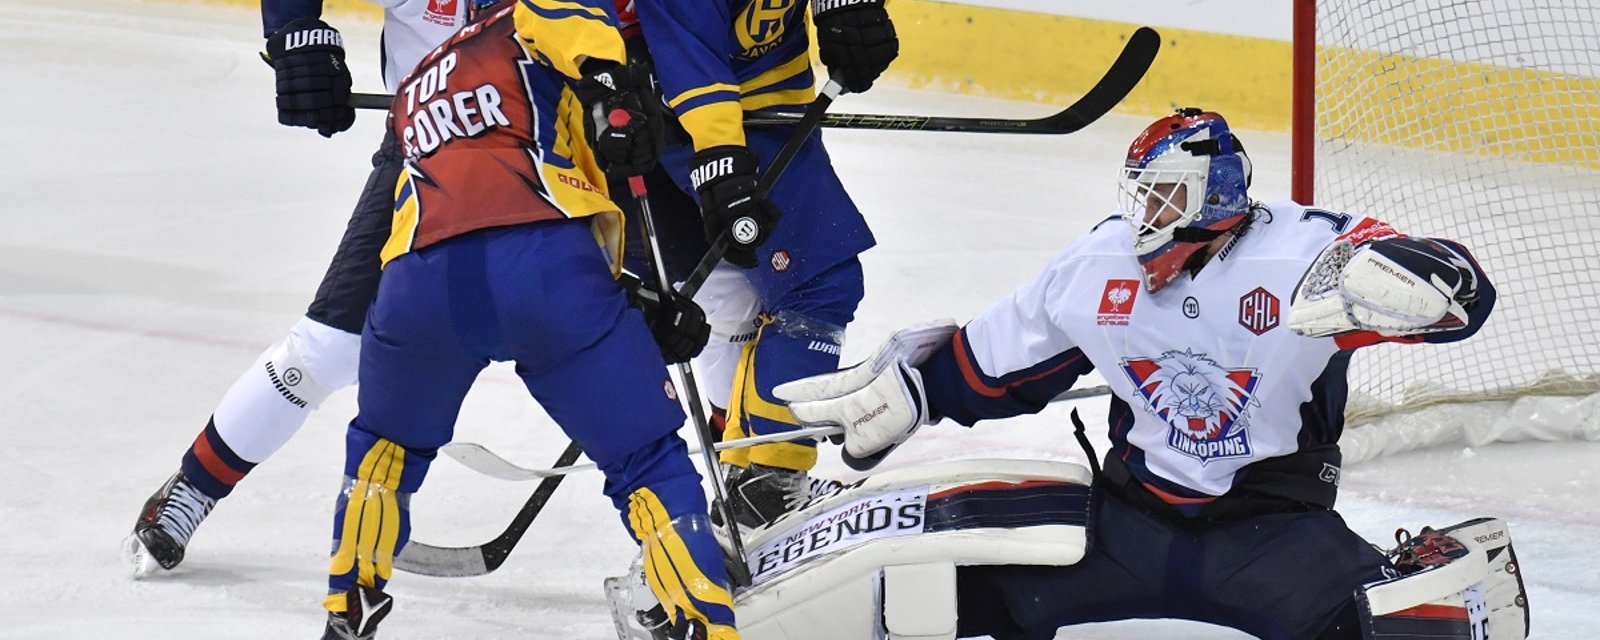 One of Sweden's top goalies has signed with an NHL team.